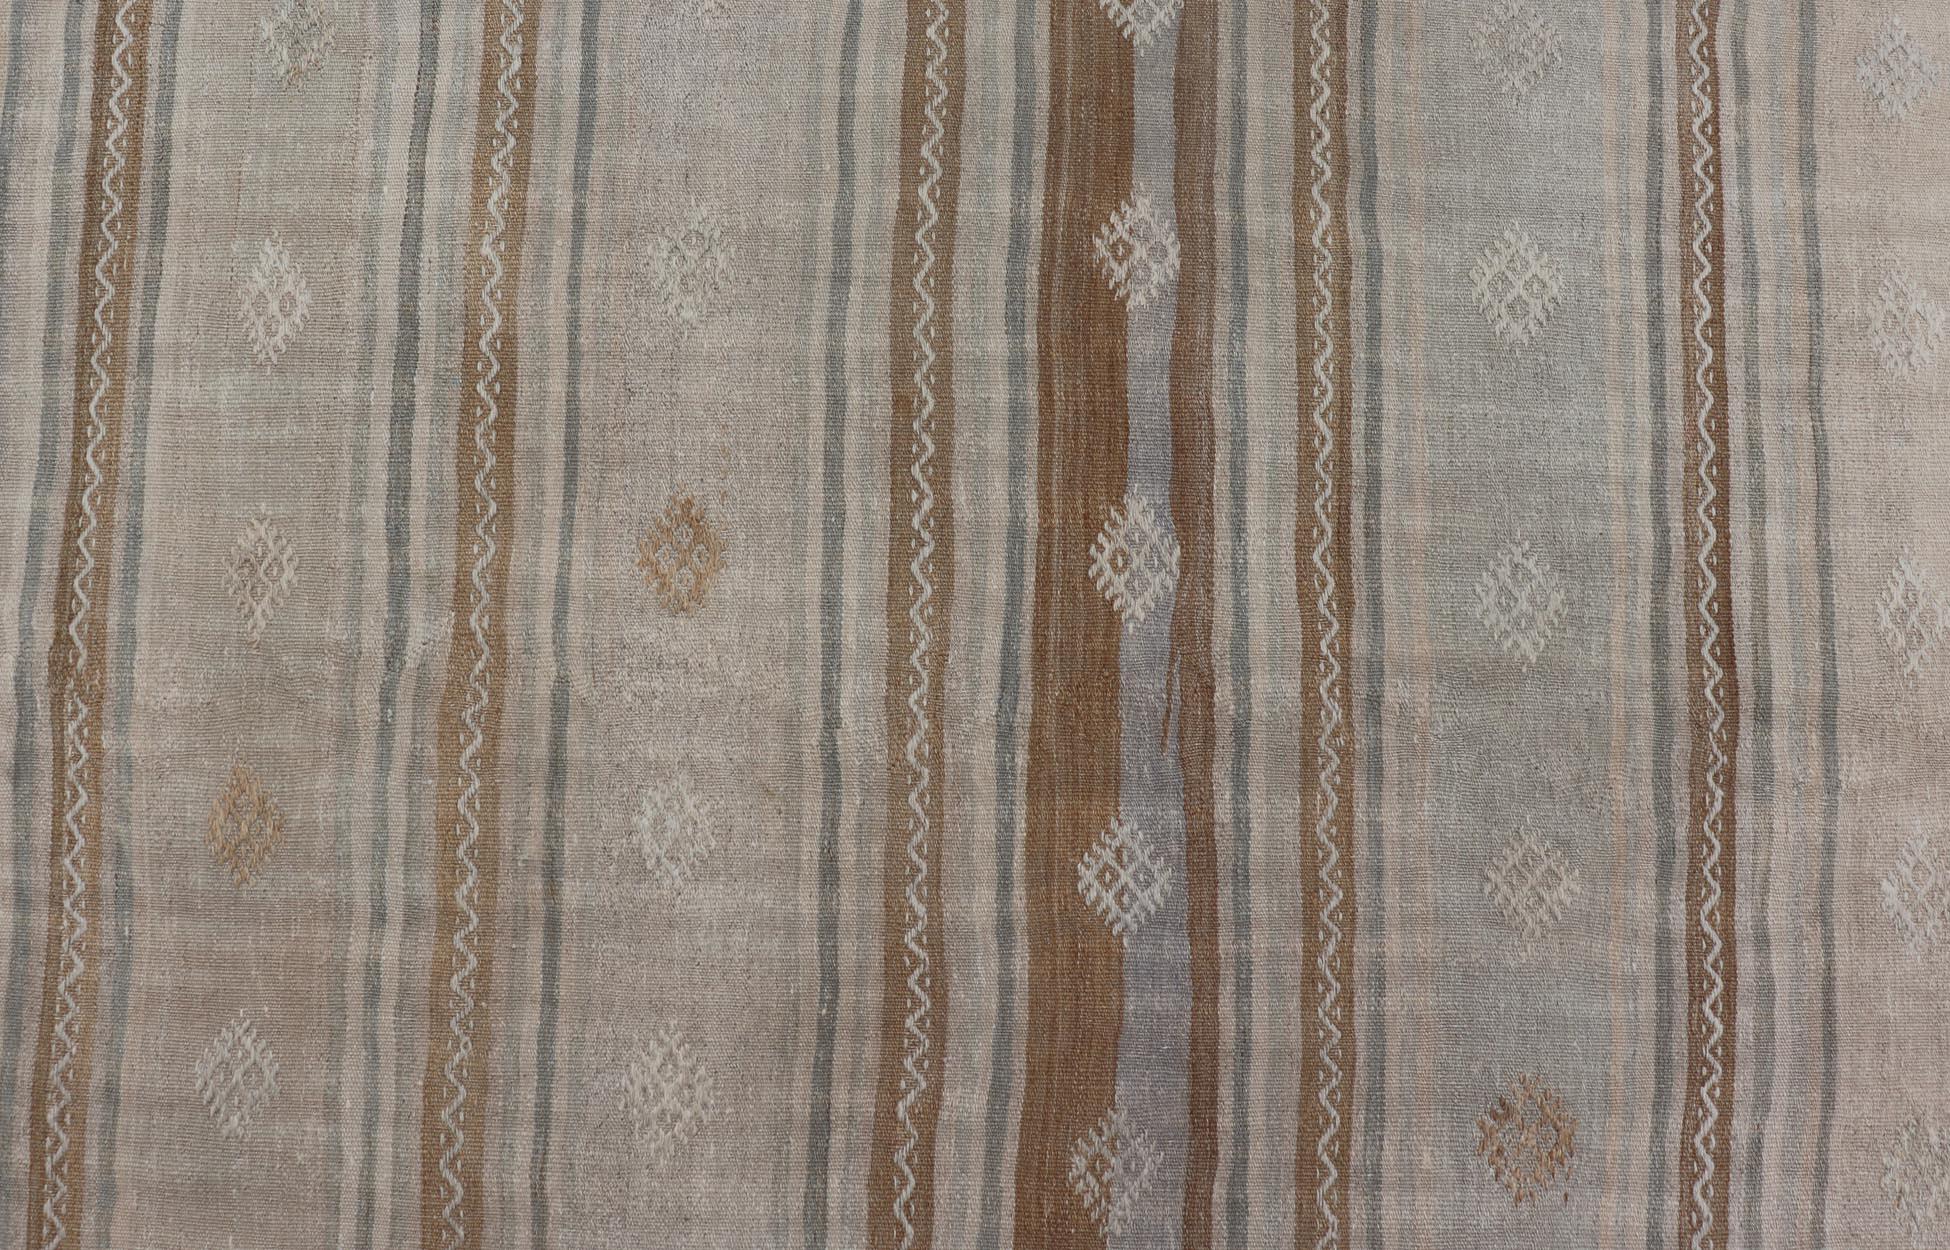 Vintage flat-weave Kilim with embroideries with a modern design in tan, brown, and blue
geometric stripe design vintage Kilim from Turkey, Keivan Woven Arts / rug EN-13979, country of origin / type: Turkey / Kilim, circa 1950

Measures: 4'8 x 9'9.